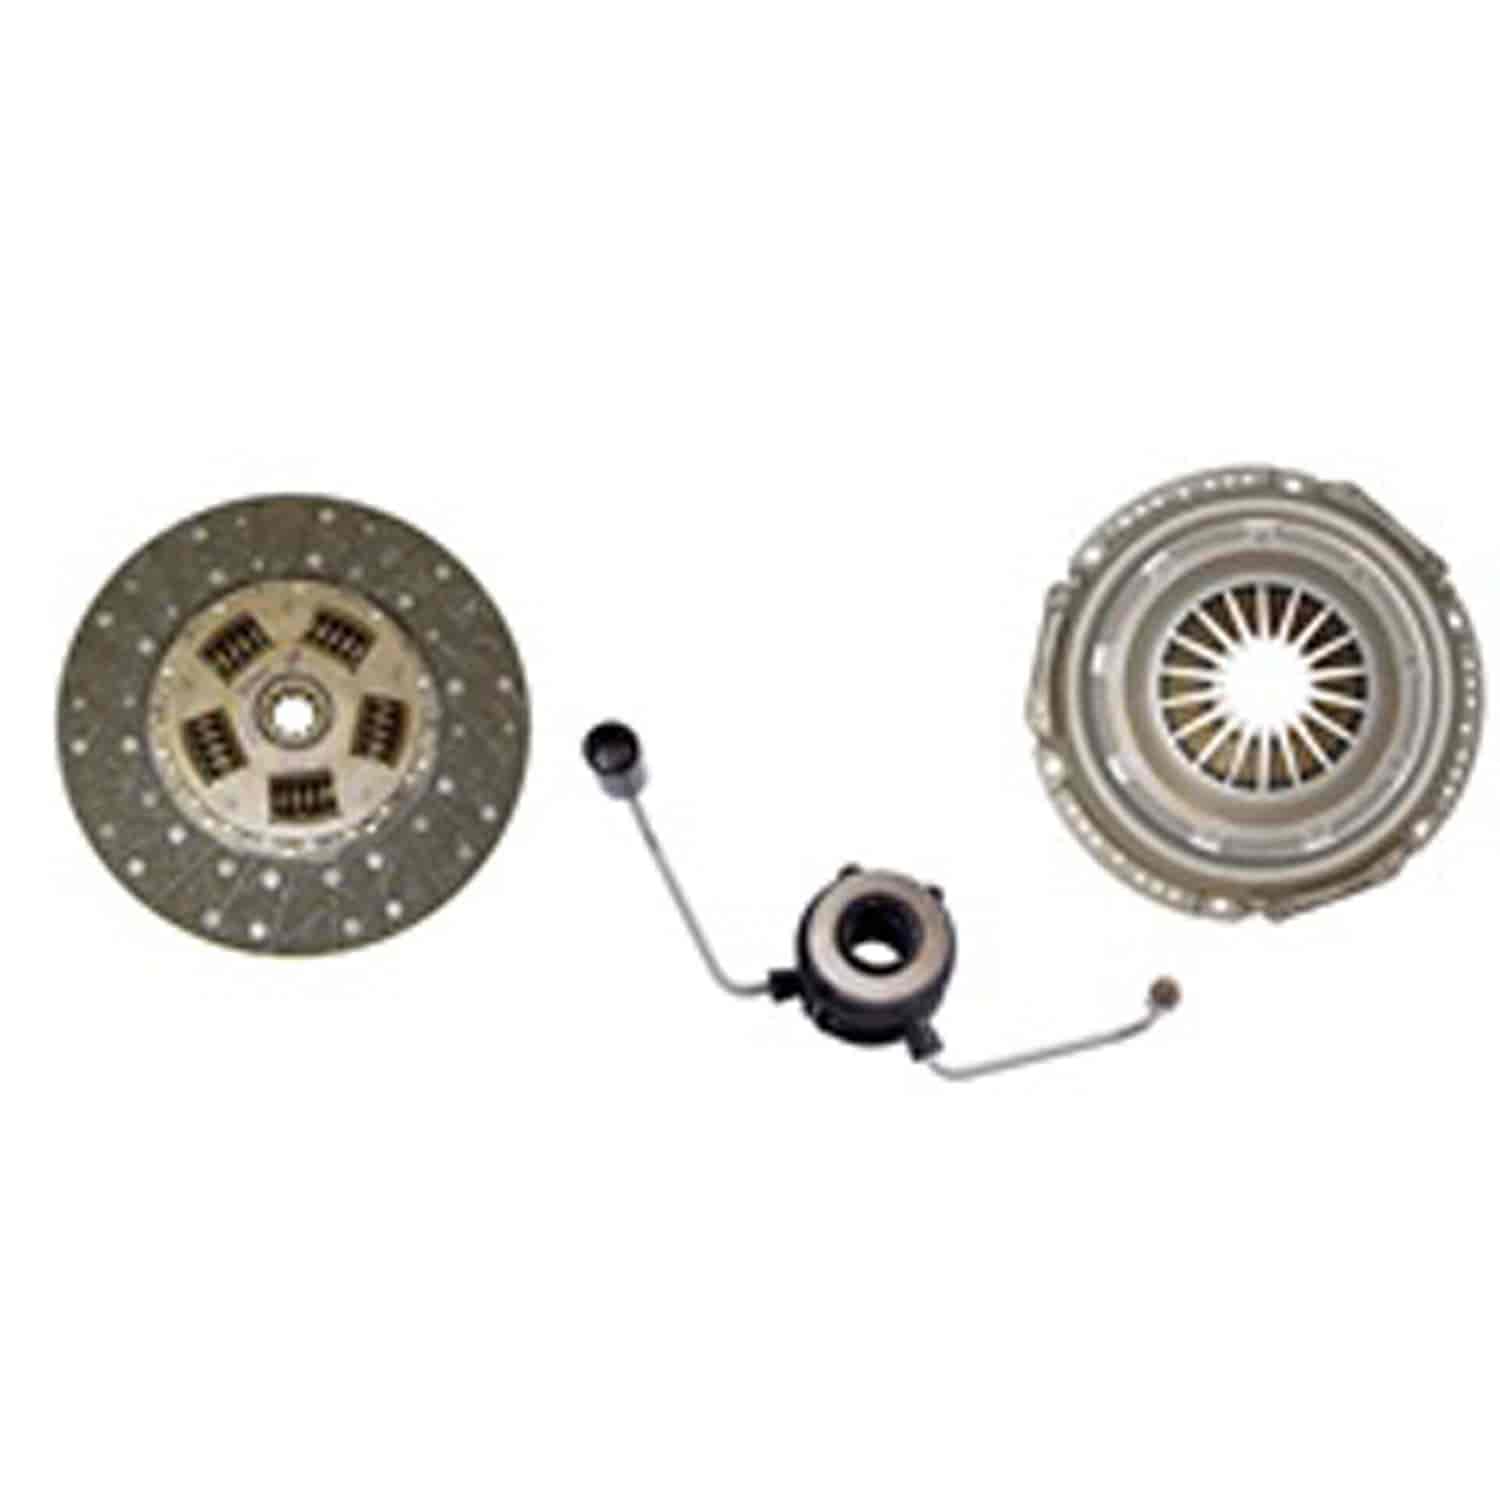 This clutch kit from Omix-ADA fits 89-91 Jeep Wrangler YJ XJ Cherokees and MJ Comanches with the 6-c